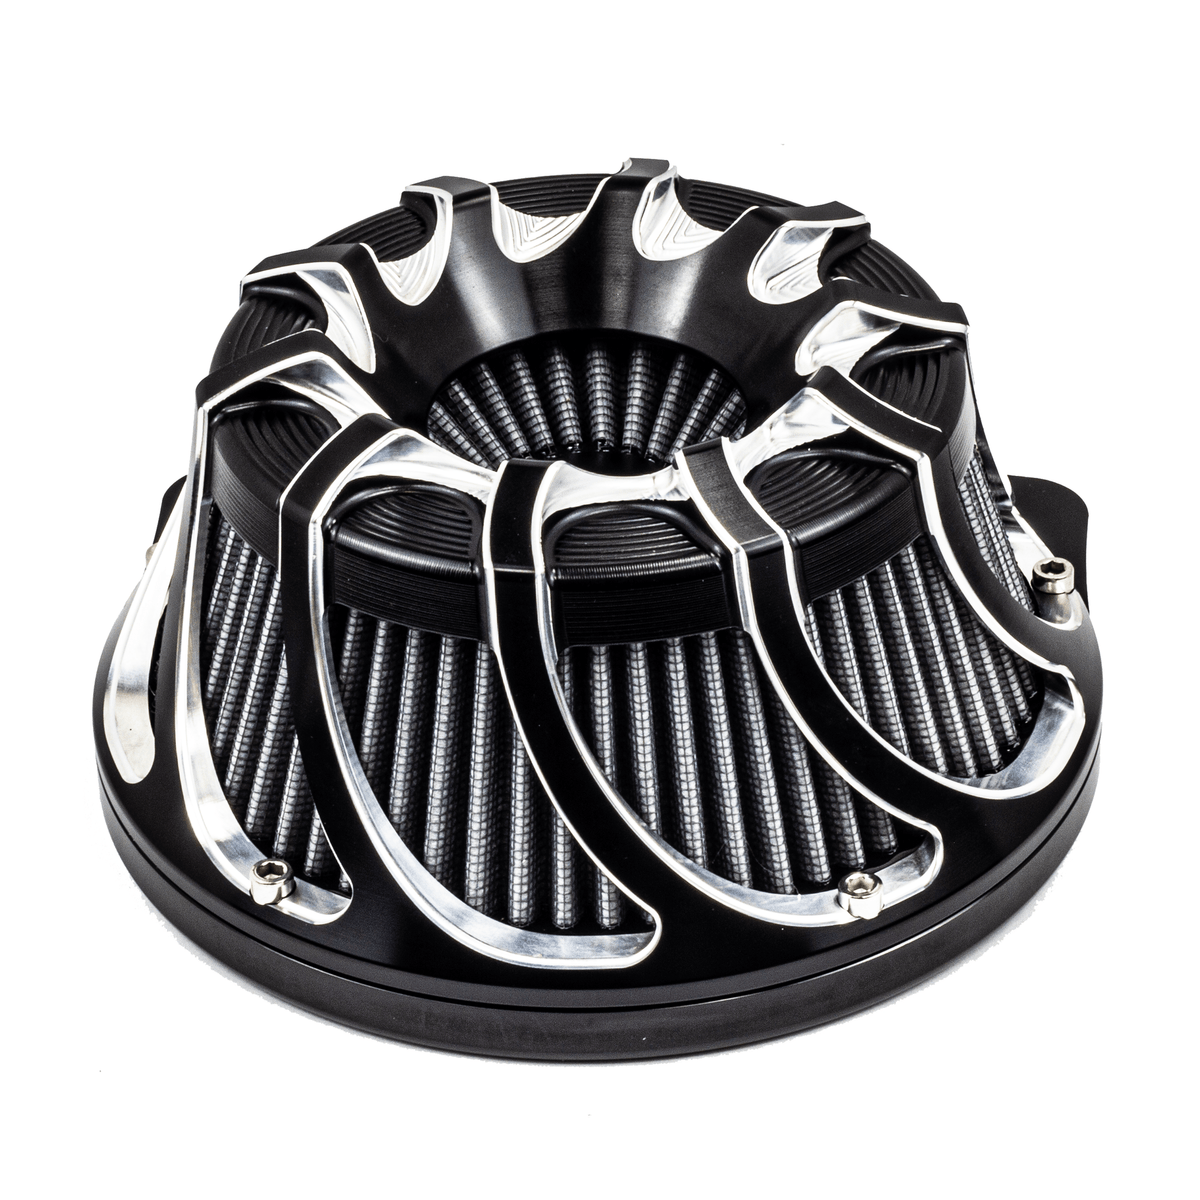 Eagle Lights AIRSHIELD Metal Air Filter for 2017+ Harley Davidson Softail and Touring Models